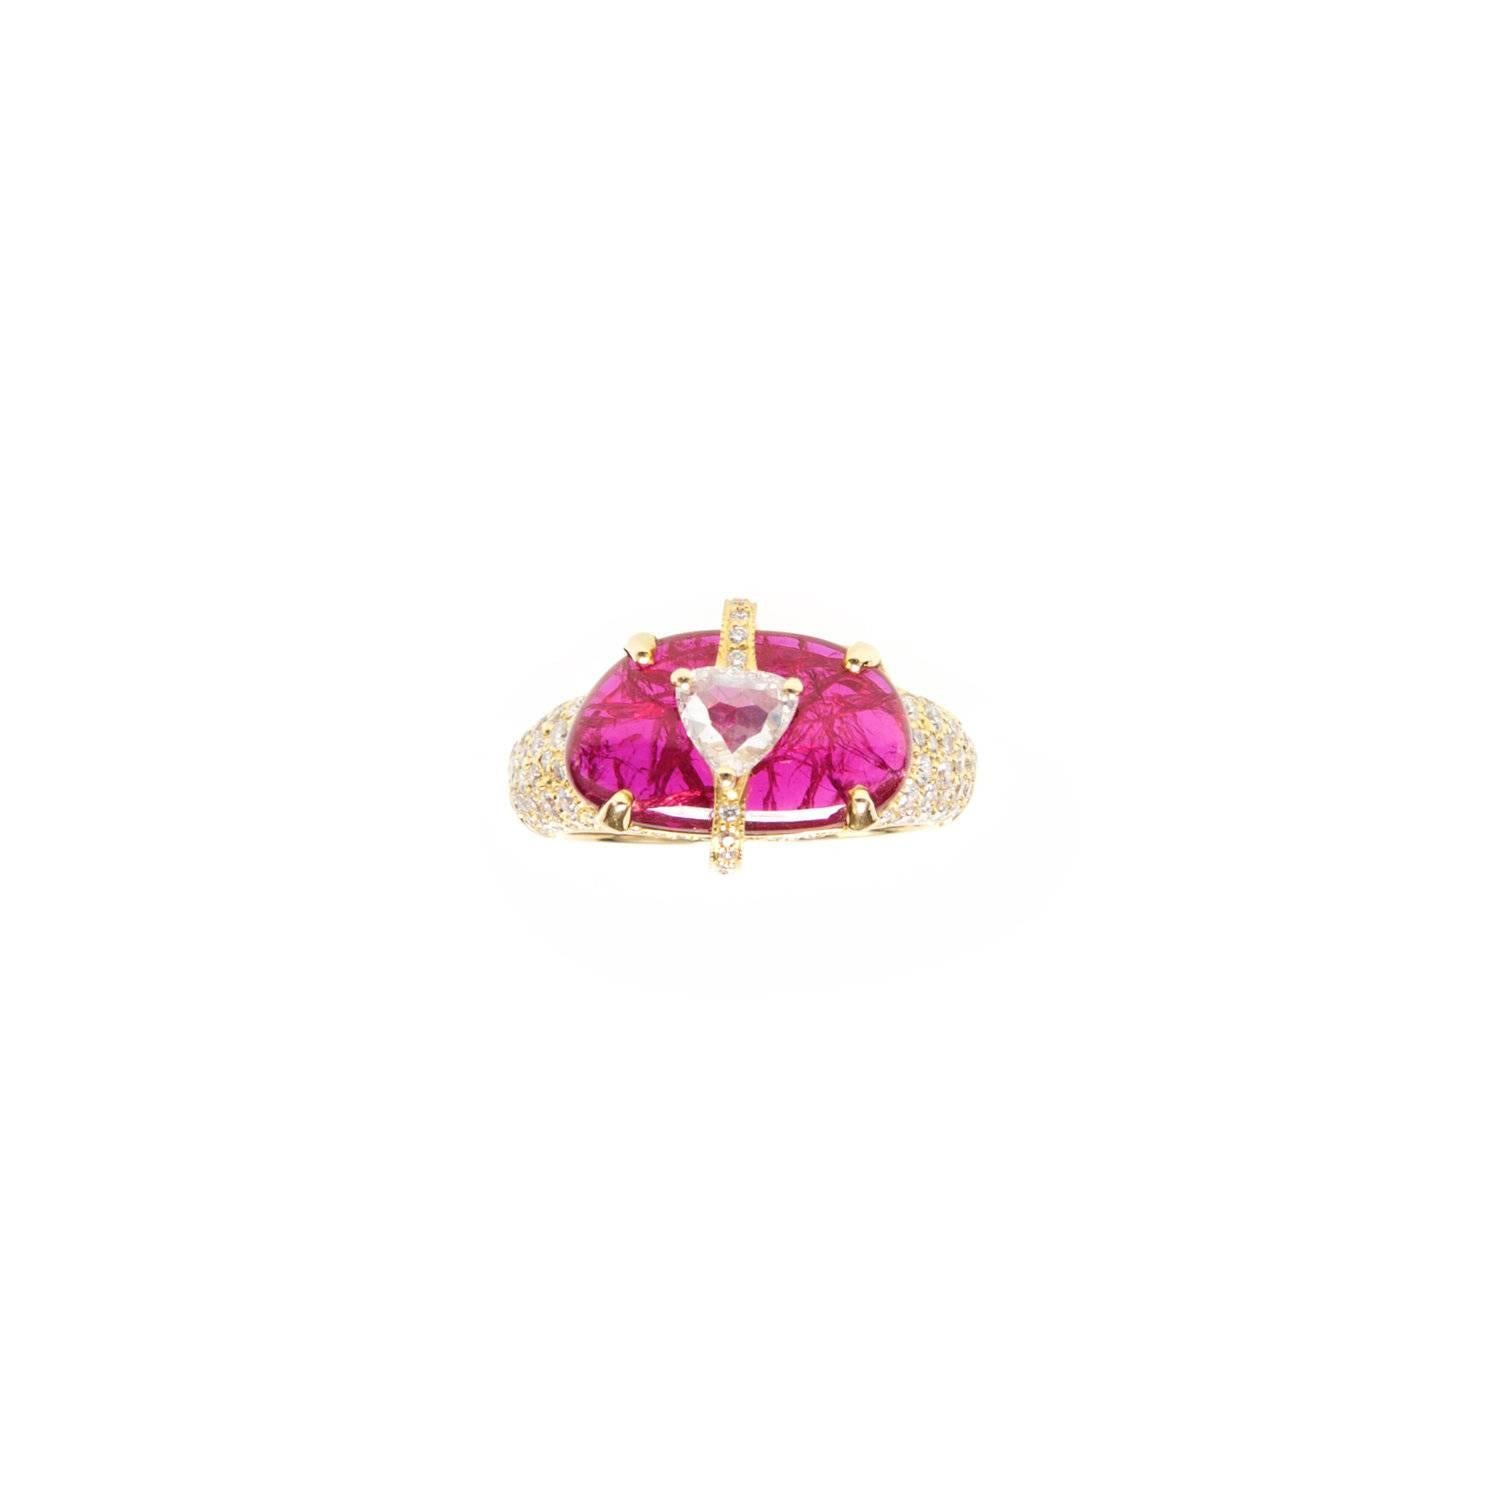 Make a stunning statement with Ri Noor's Ruby Slice Diamond Ring. Featuring an intricate arrangement of stones, the striking ring consists of a substantial unenhanced ruby topped with a trillion cut diamond all set in 18k yellow gold with a band